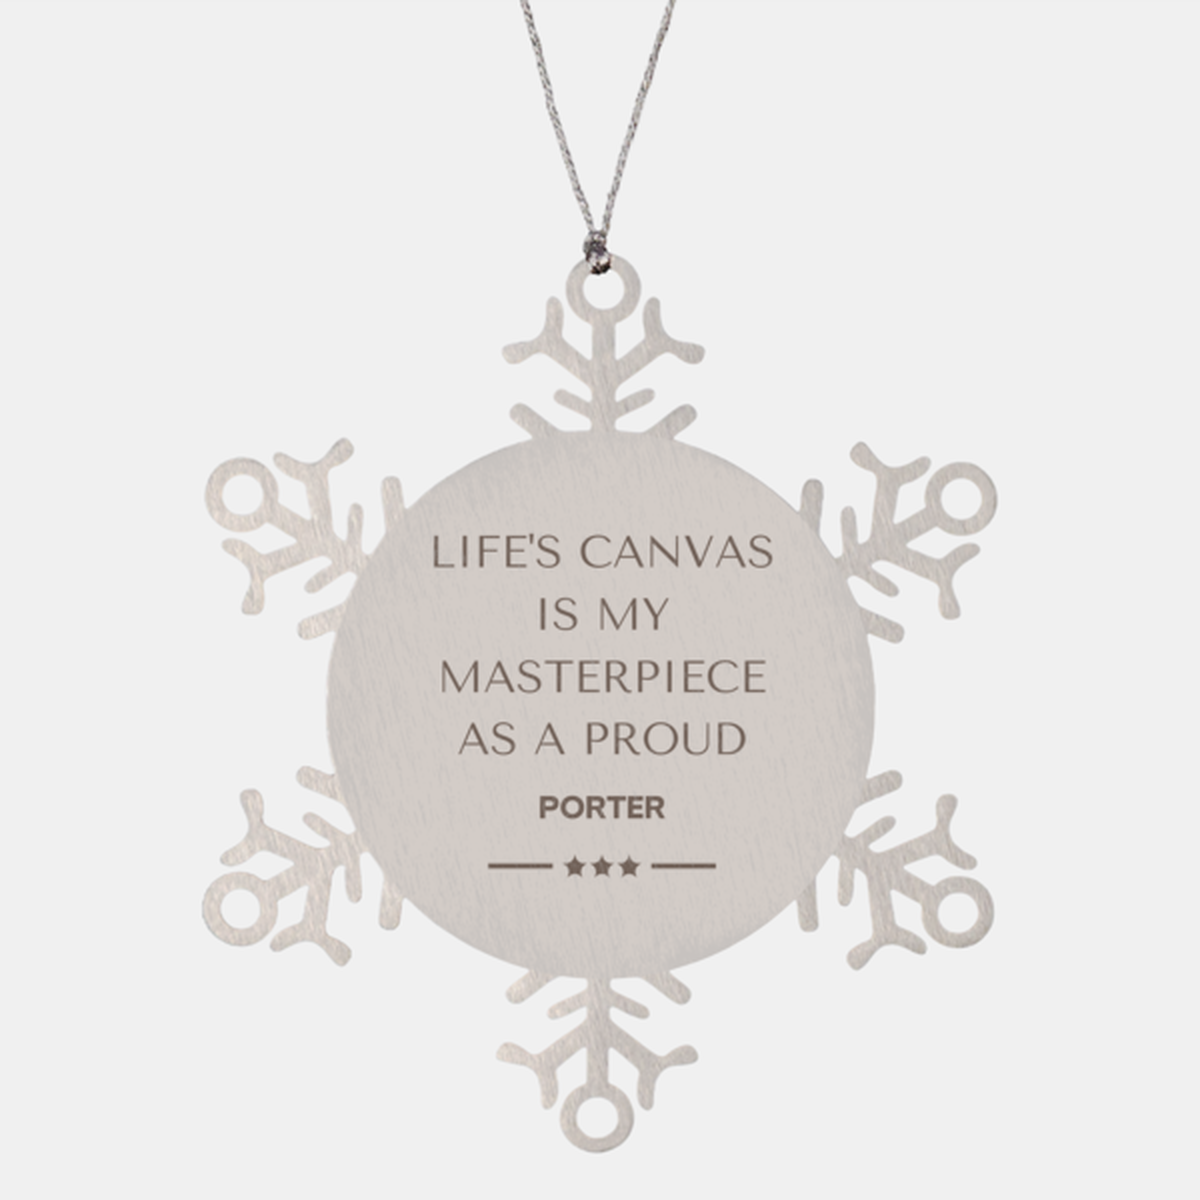 Proud Porter Gifts, Life's canvas is my masterpiece, Epic Birthday Christmas Unique Snowflake Ornament For Porter, Coworkers, Men, Women, Friends